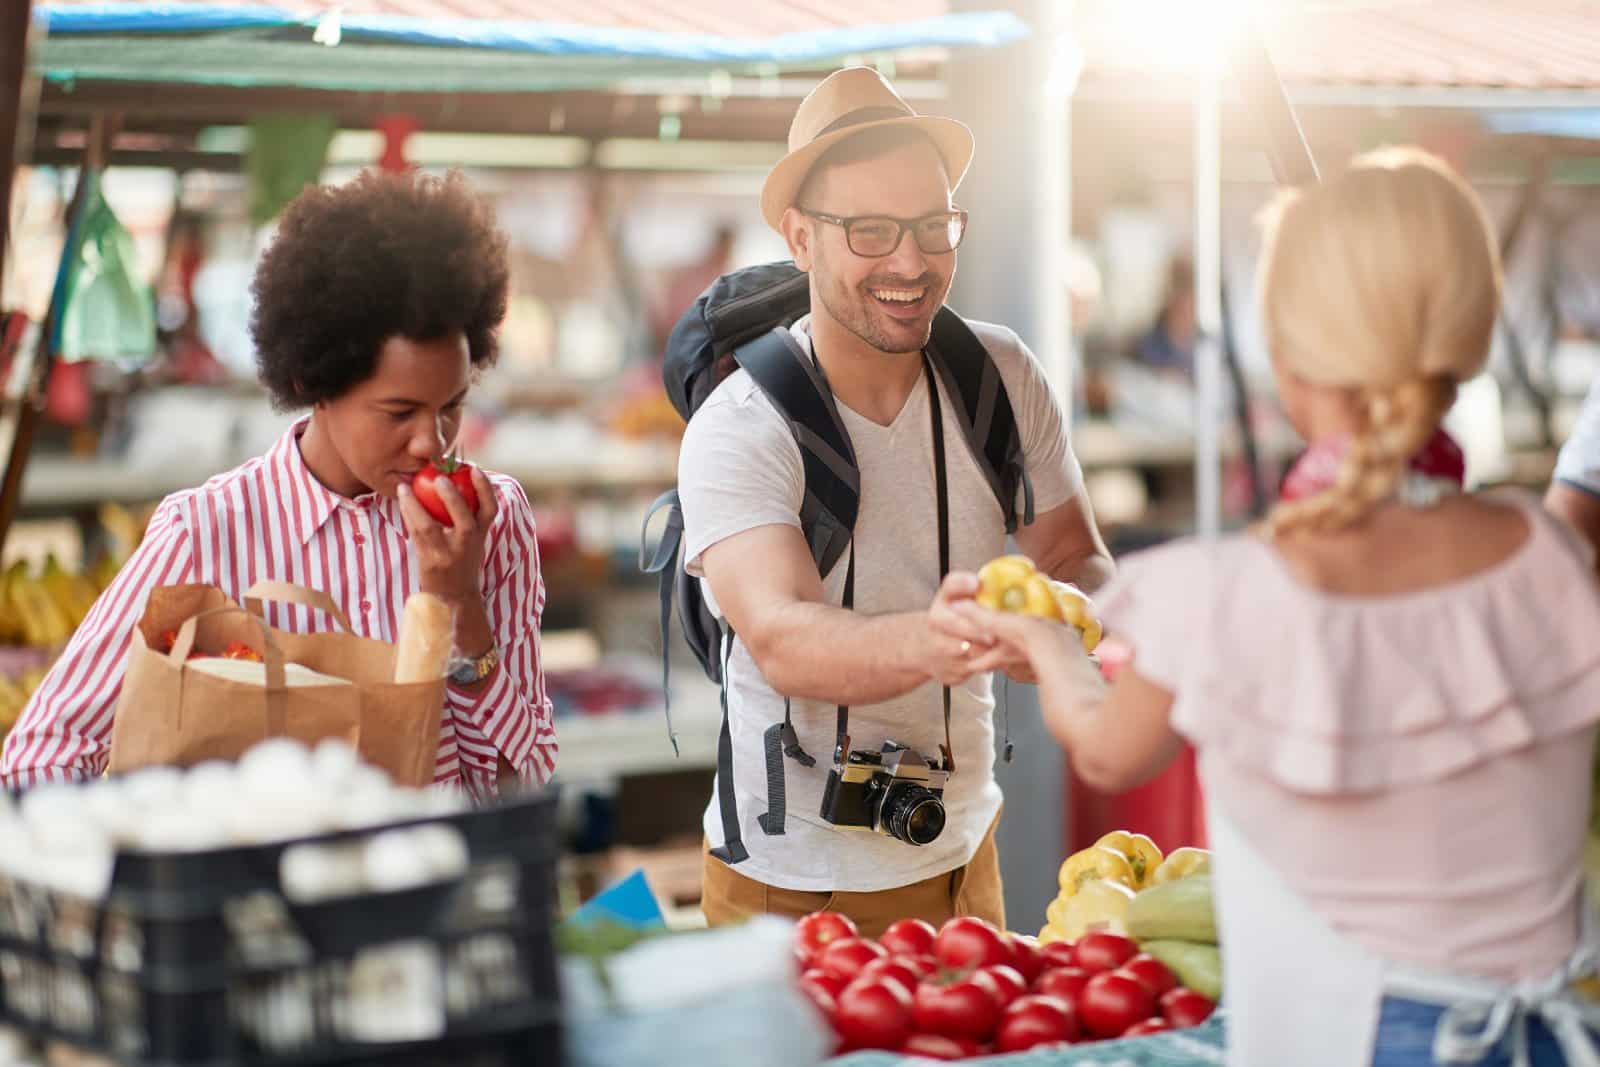 <p class="wp-caption-text">Image Credit: Shutterstock / Lucky Business</p>  <p>In many cultures, haggling is part of the shopping experience. Doing it well (and not overdoing it) can make you seem less like an outsider.</p>